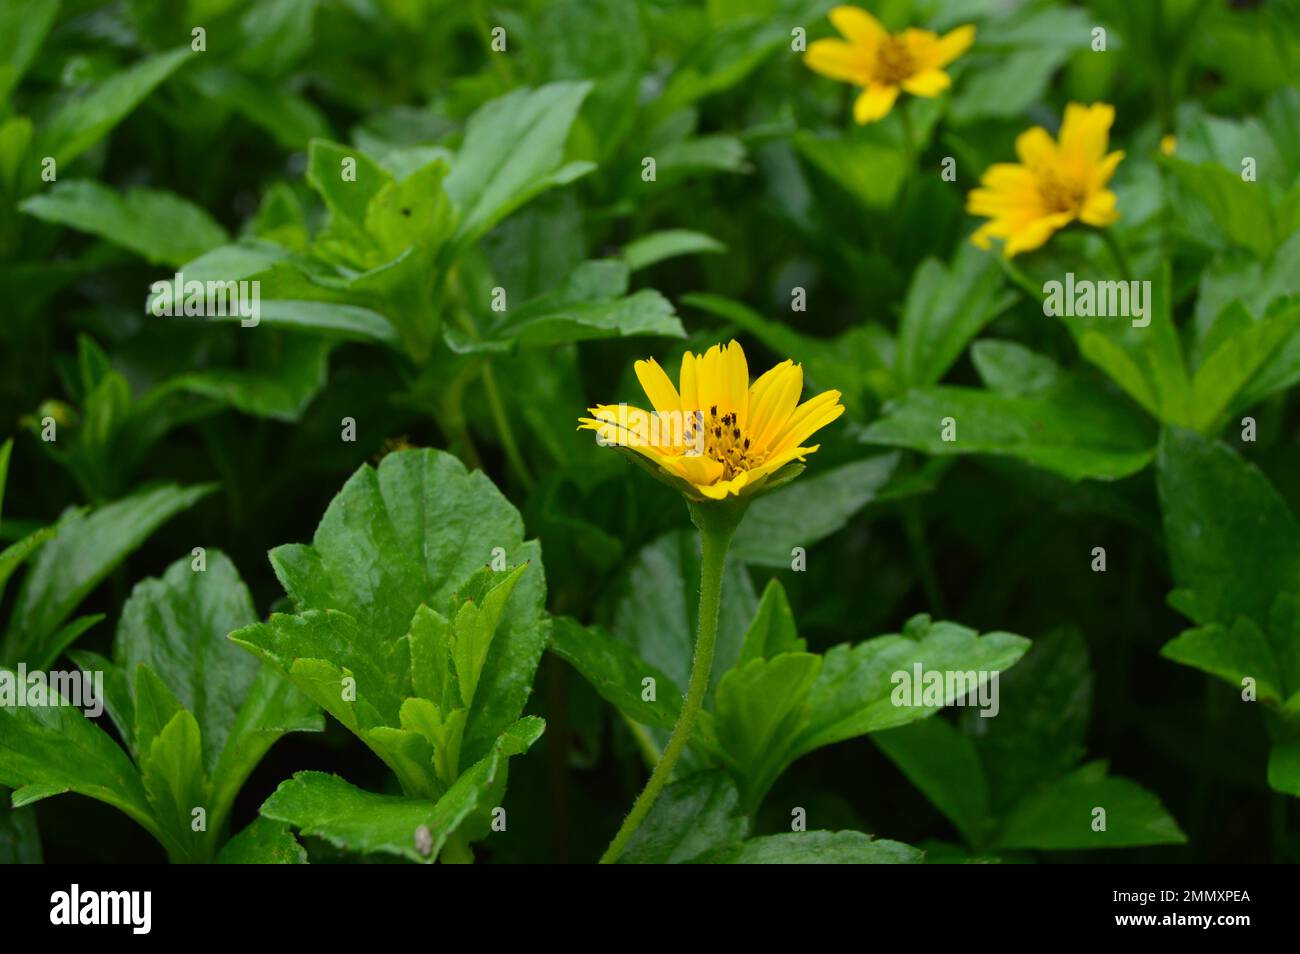 Portrait of Wedelia or Sphagneticola trilobata flowers. Mini sunflowers. Ornamental plants for garden or outdoor areas. Stock Photo